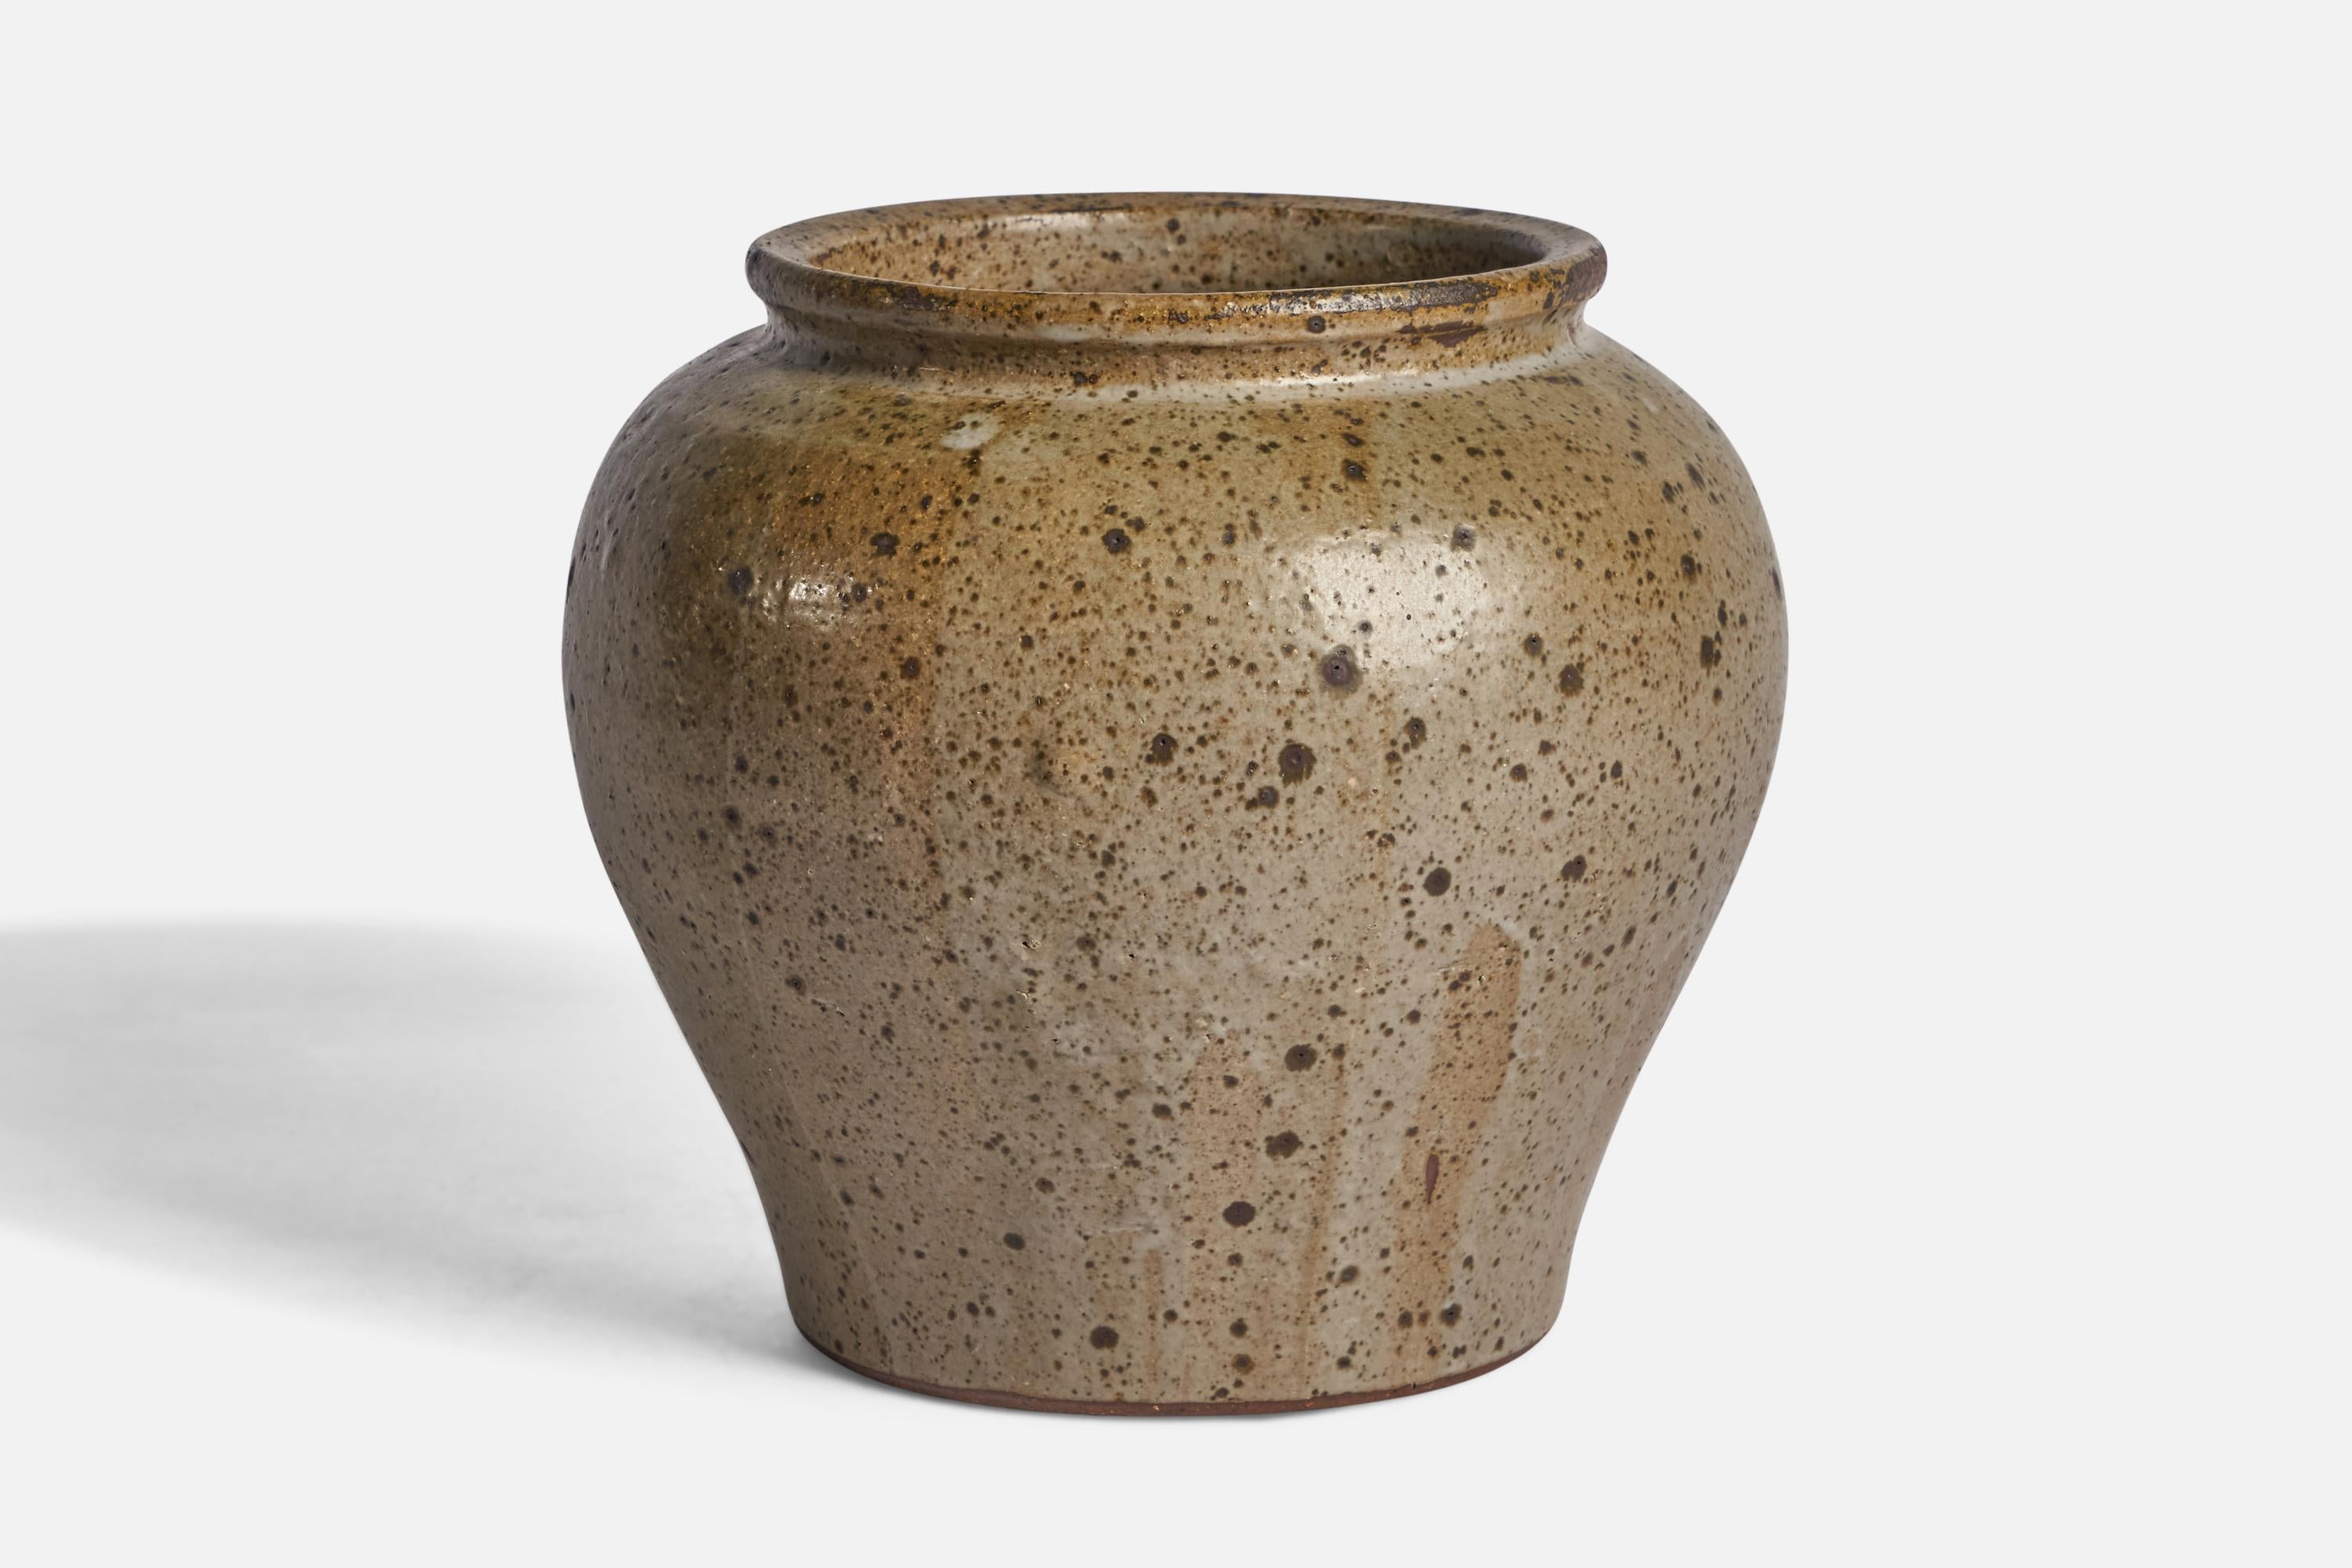 A sizeable grey-glazed stoneware vase designed and produced by Rolf Palm, Mölle, Sweden, 1968.
